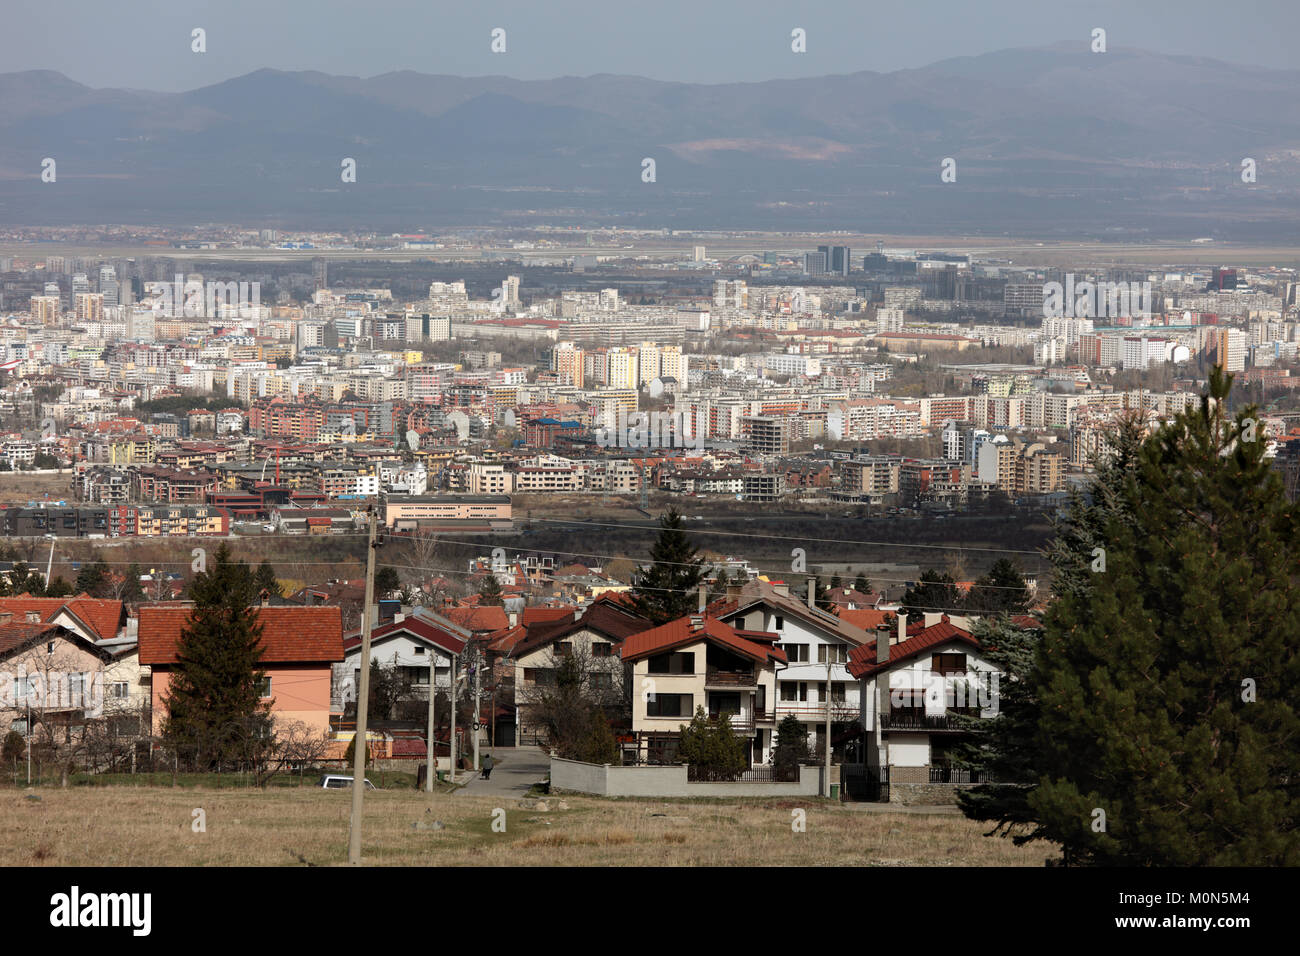 Sofia, Bulgaria - March 7, 2016: Cityscape of the Bulgarian capital viewed from the Vitosha mount. Sofia is the 15th largest city in the European Unio Stock Photo